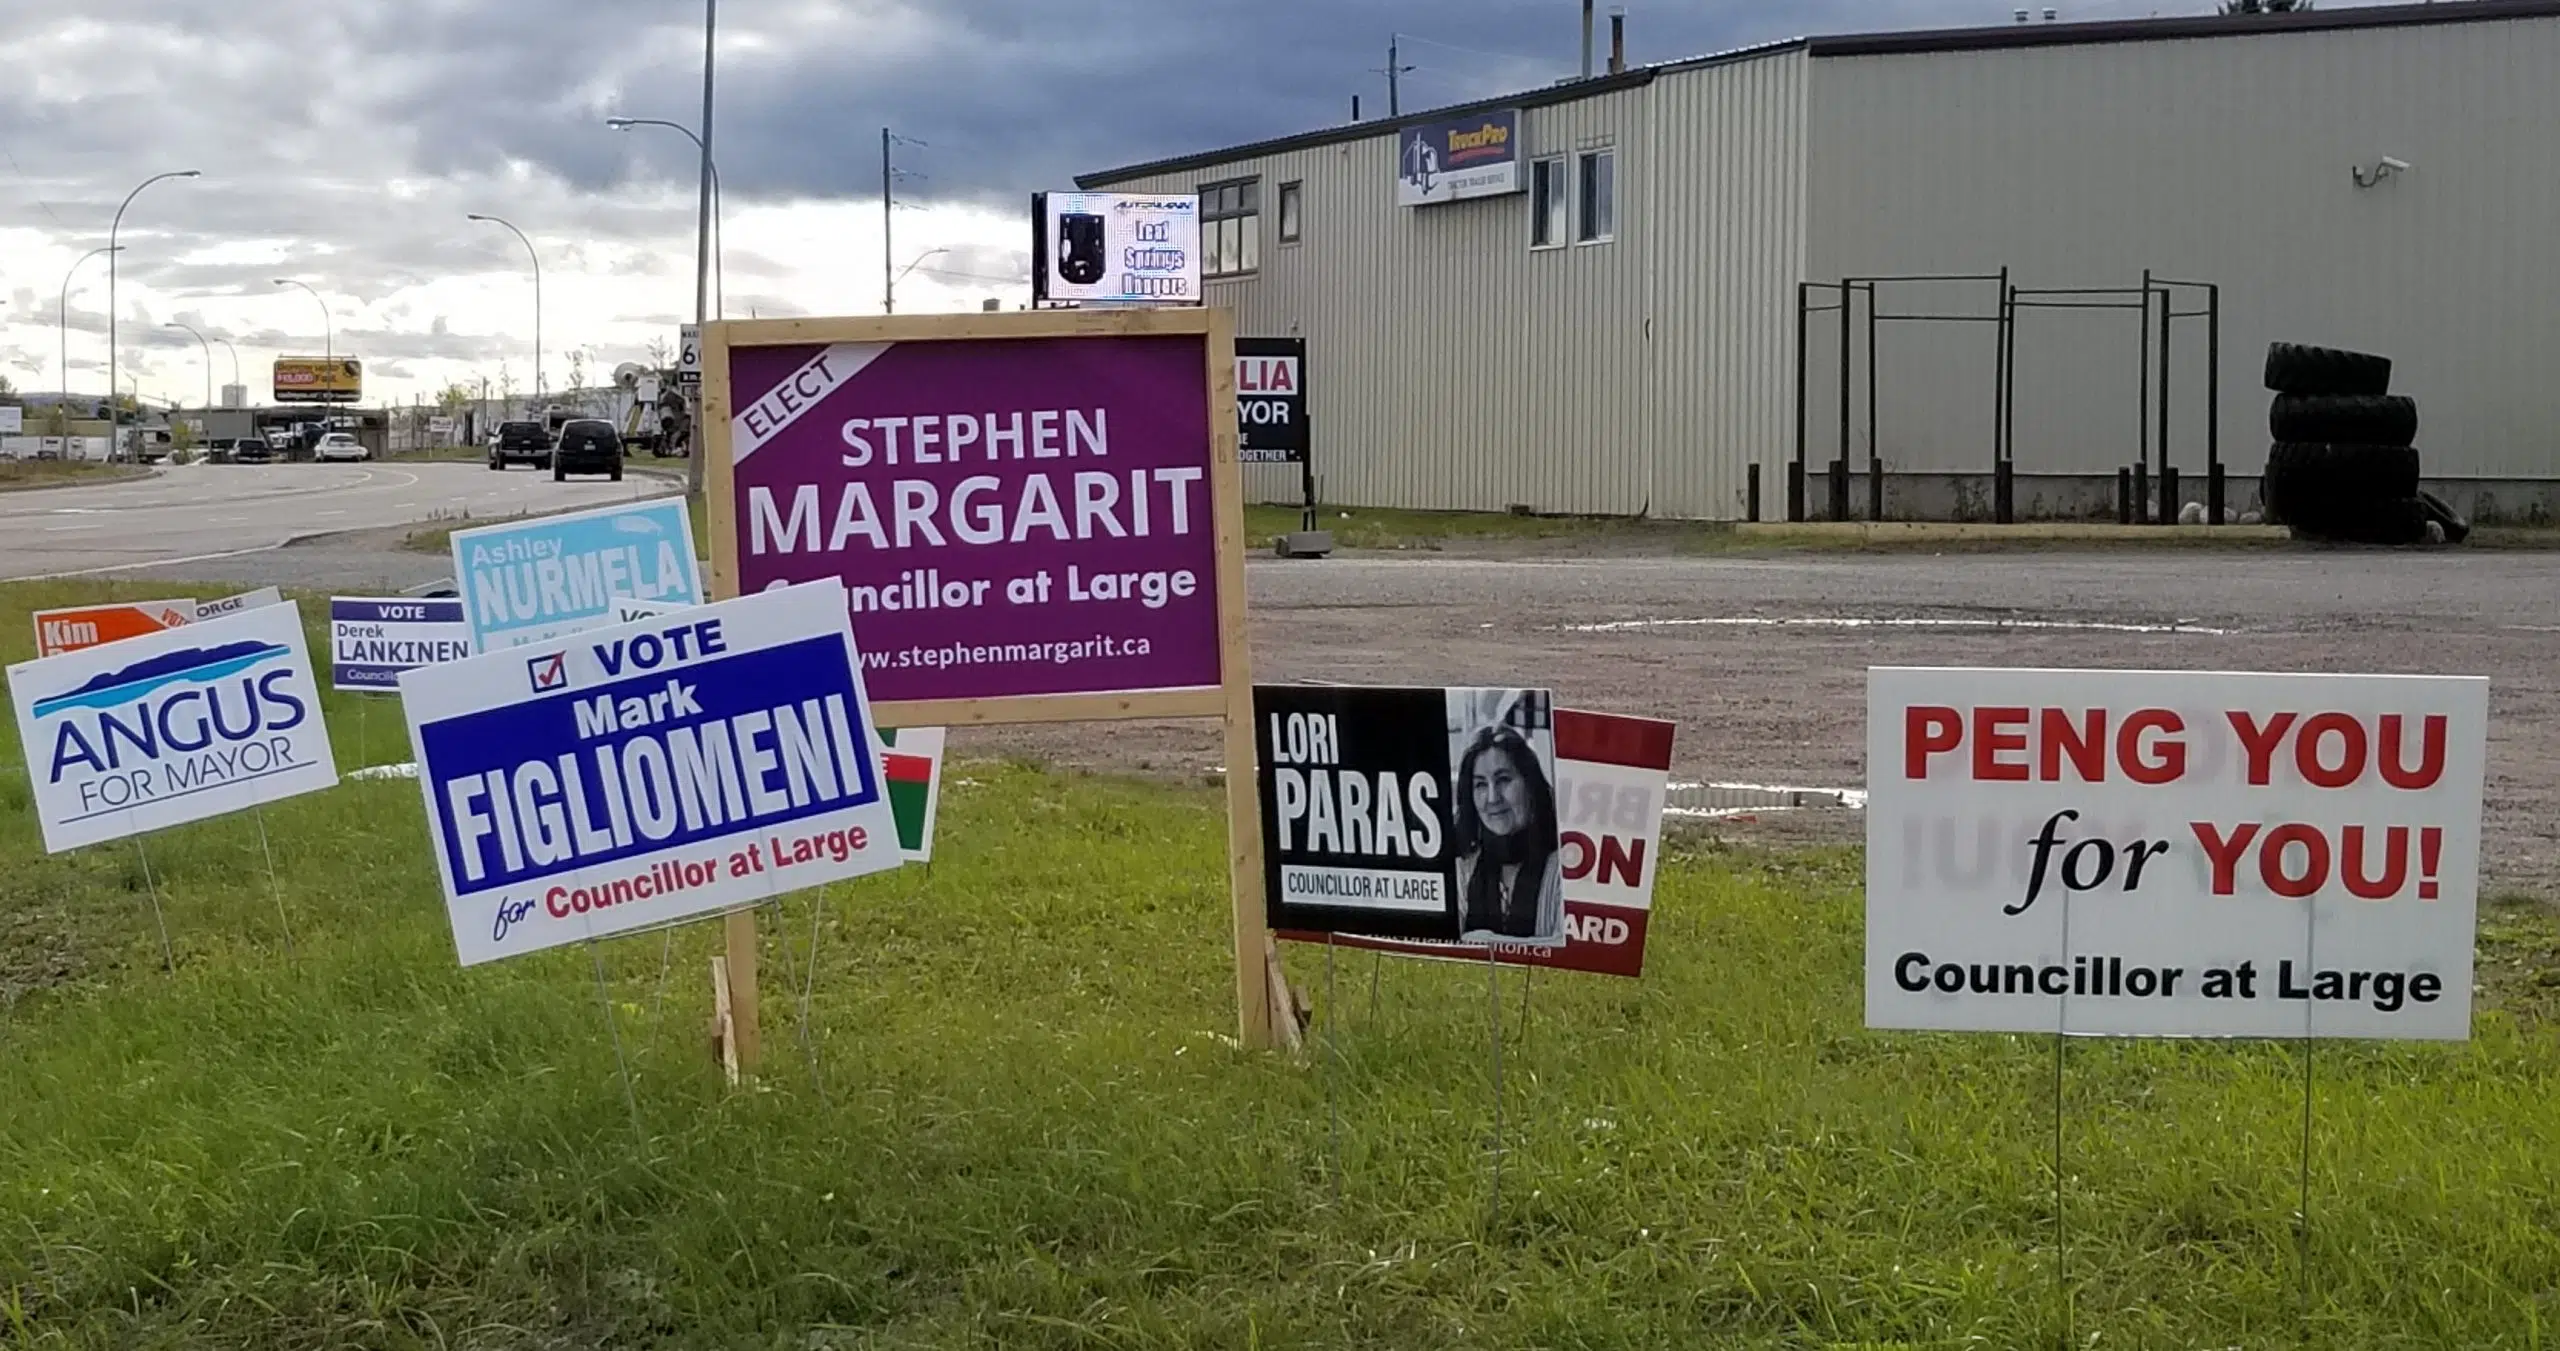 No Concerns With Election Signs: City